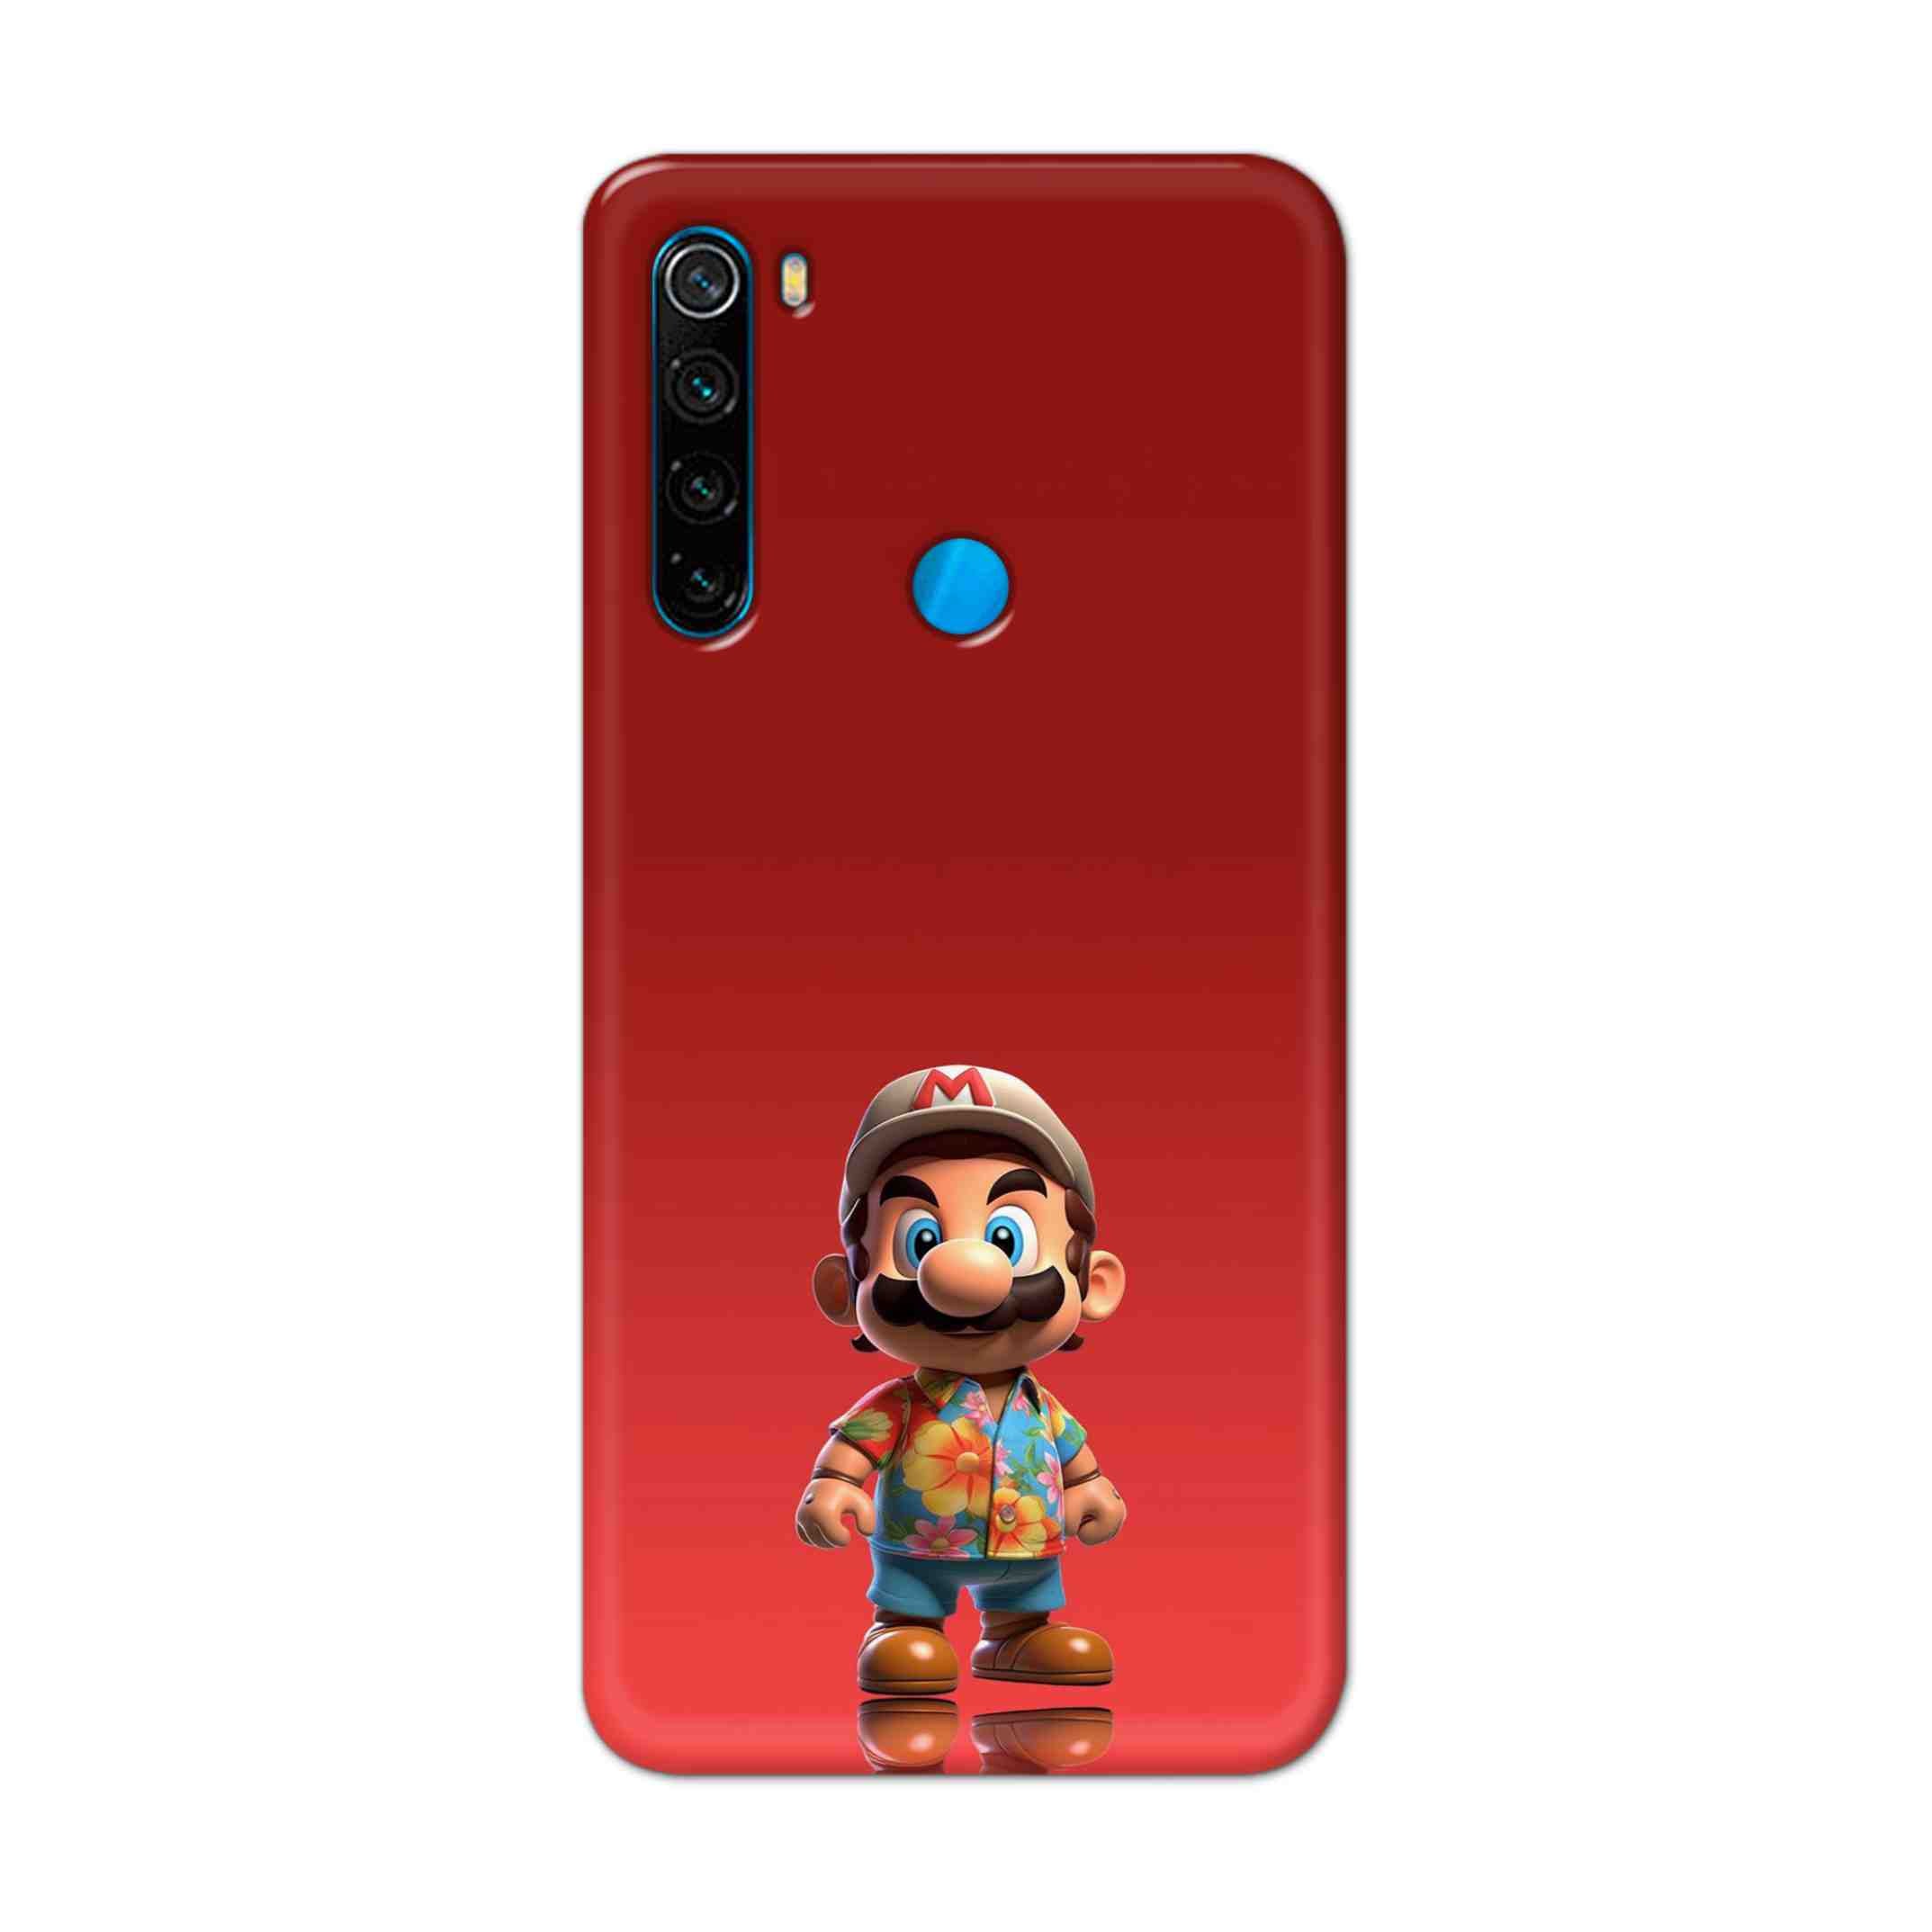 Buy Mario Hard Back Mobile Phone Case Cover For Xiaomi Redmi Note 8 Online